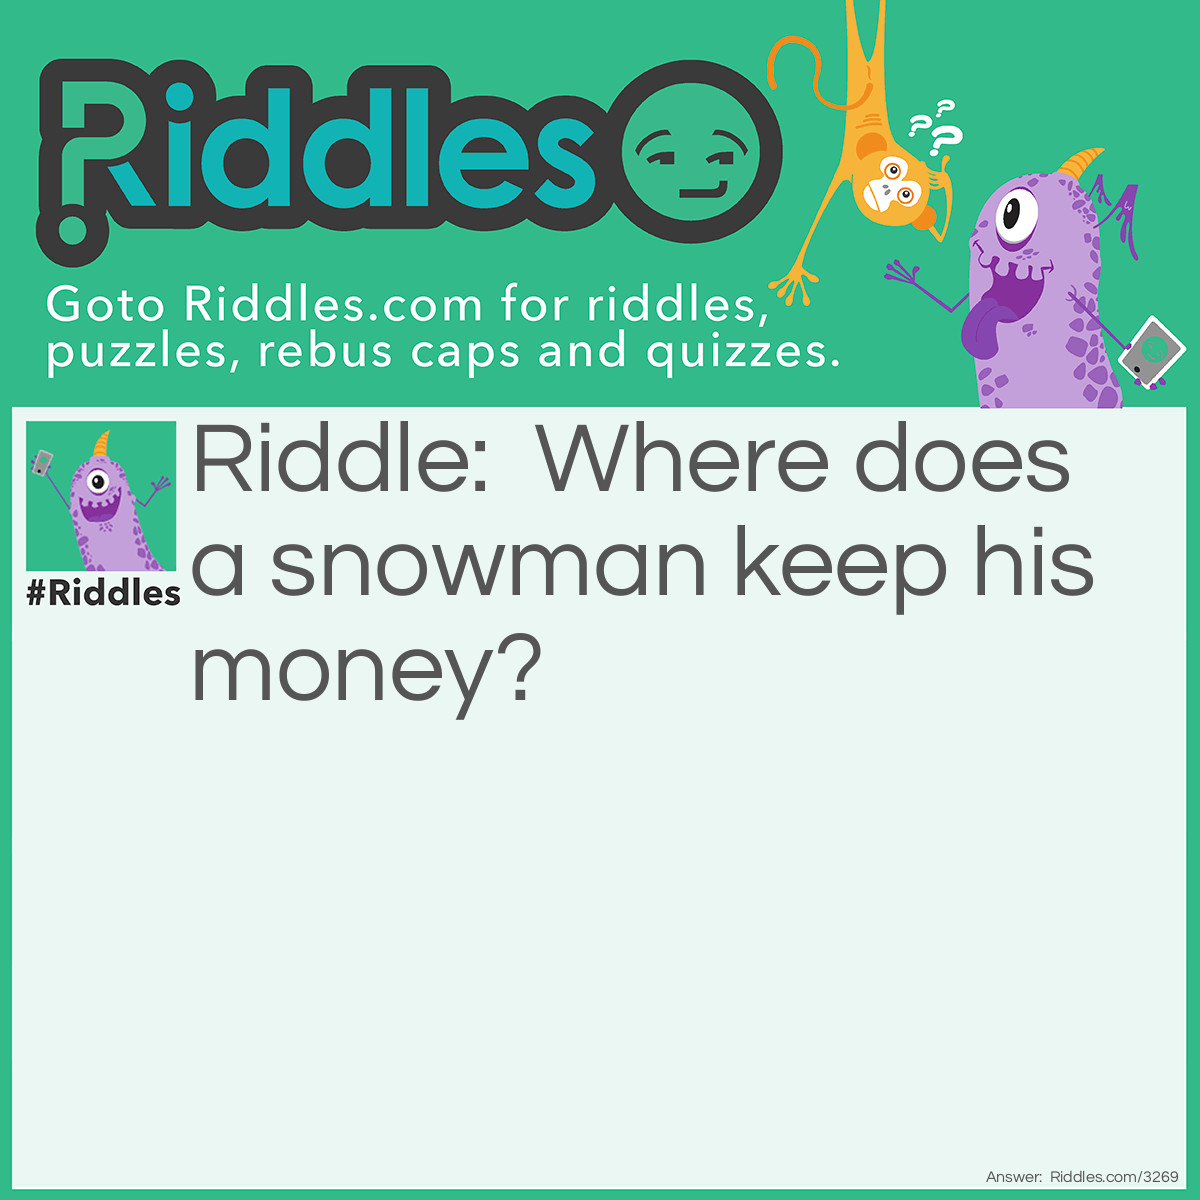 Riddle: Where does a snowman keep his money? Answer: In a snow bank.